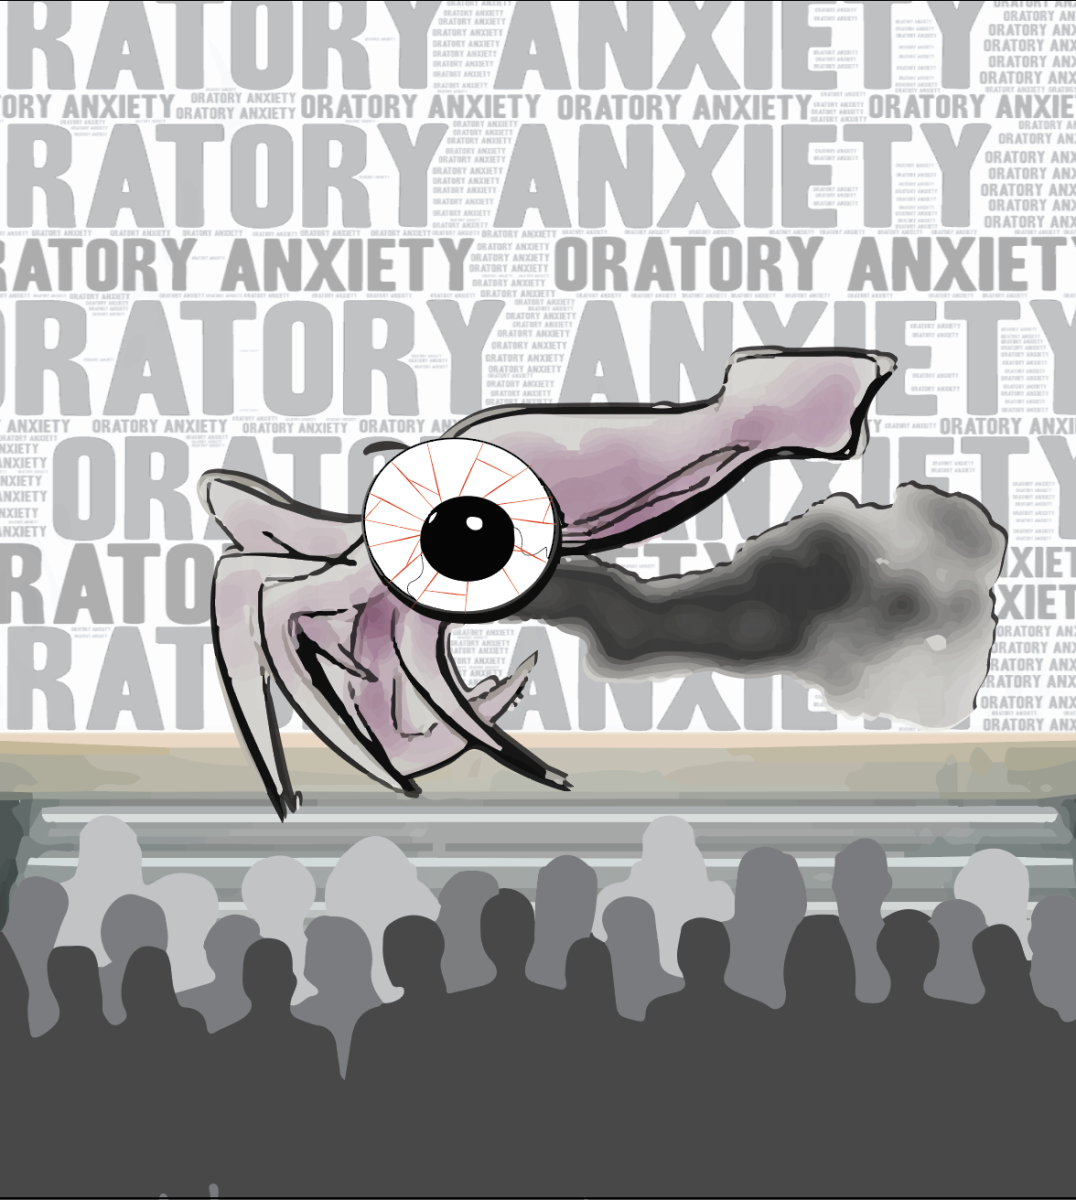 Nina Heffron 27 argues that oratories make some students feel ridiculous, like colossal squids. 